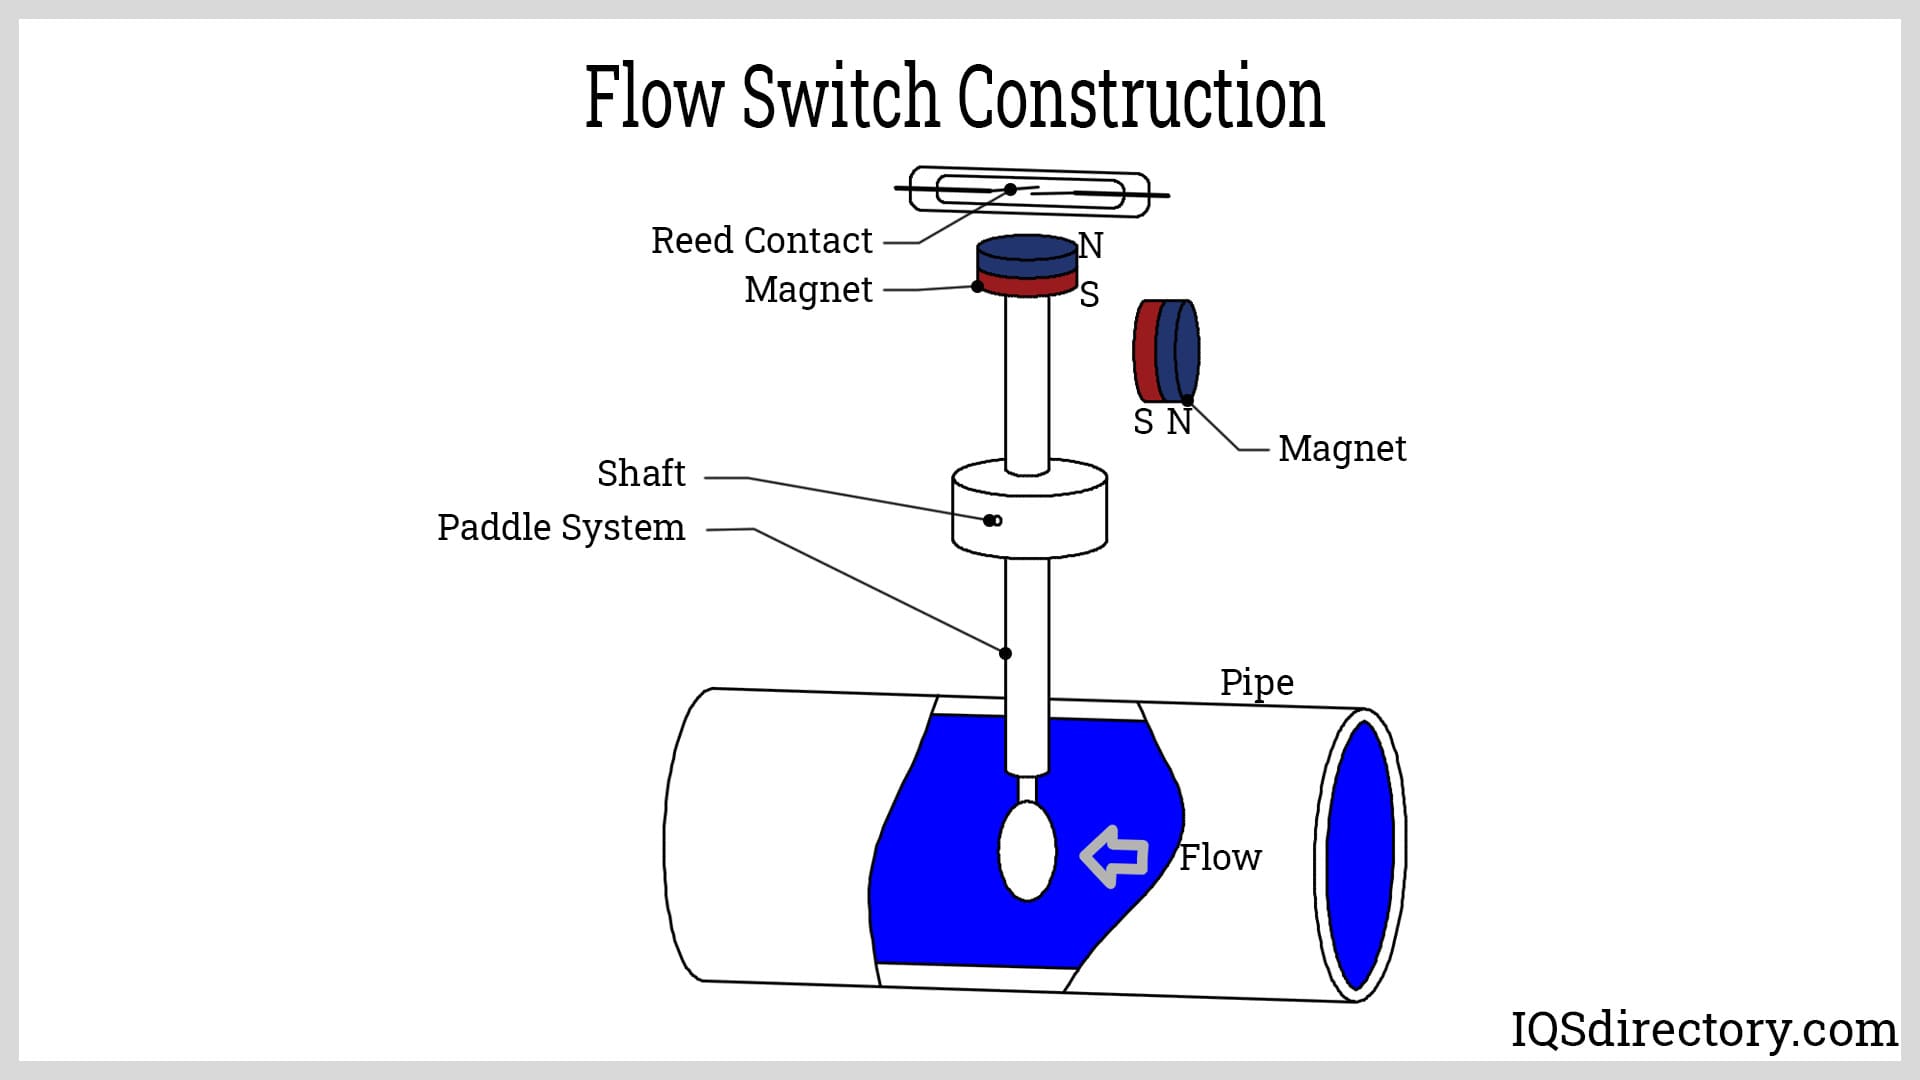 Flow Switches: What Are They? Uses, Types, Installation, 43% OFF